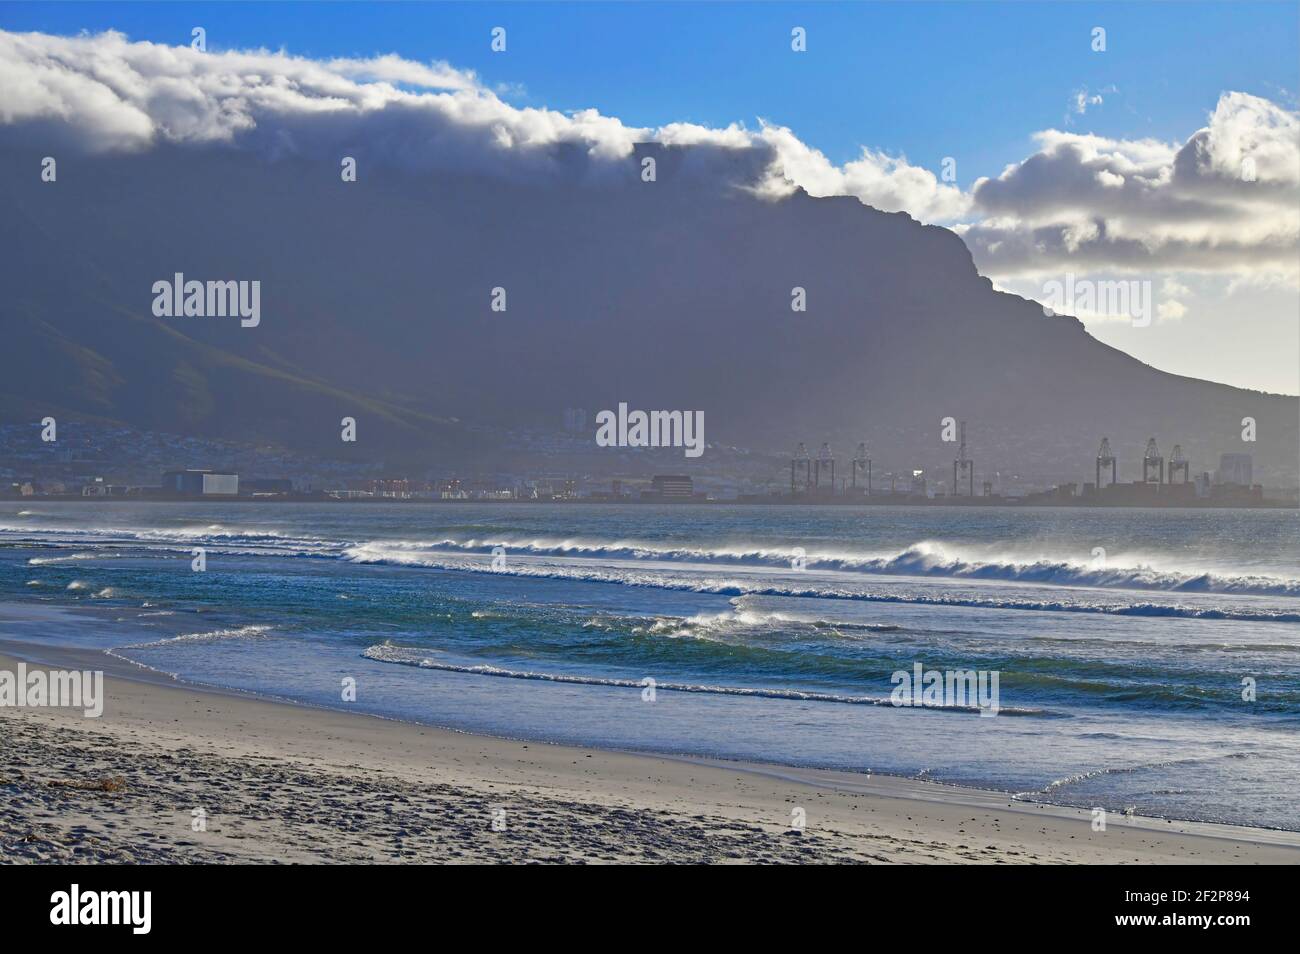 Cape Town and Table Mountain landscape seen from Milnerton beach, South Africa. Stock Photo